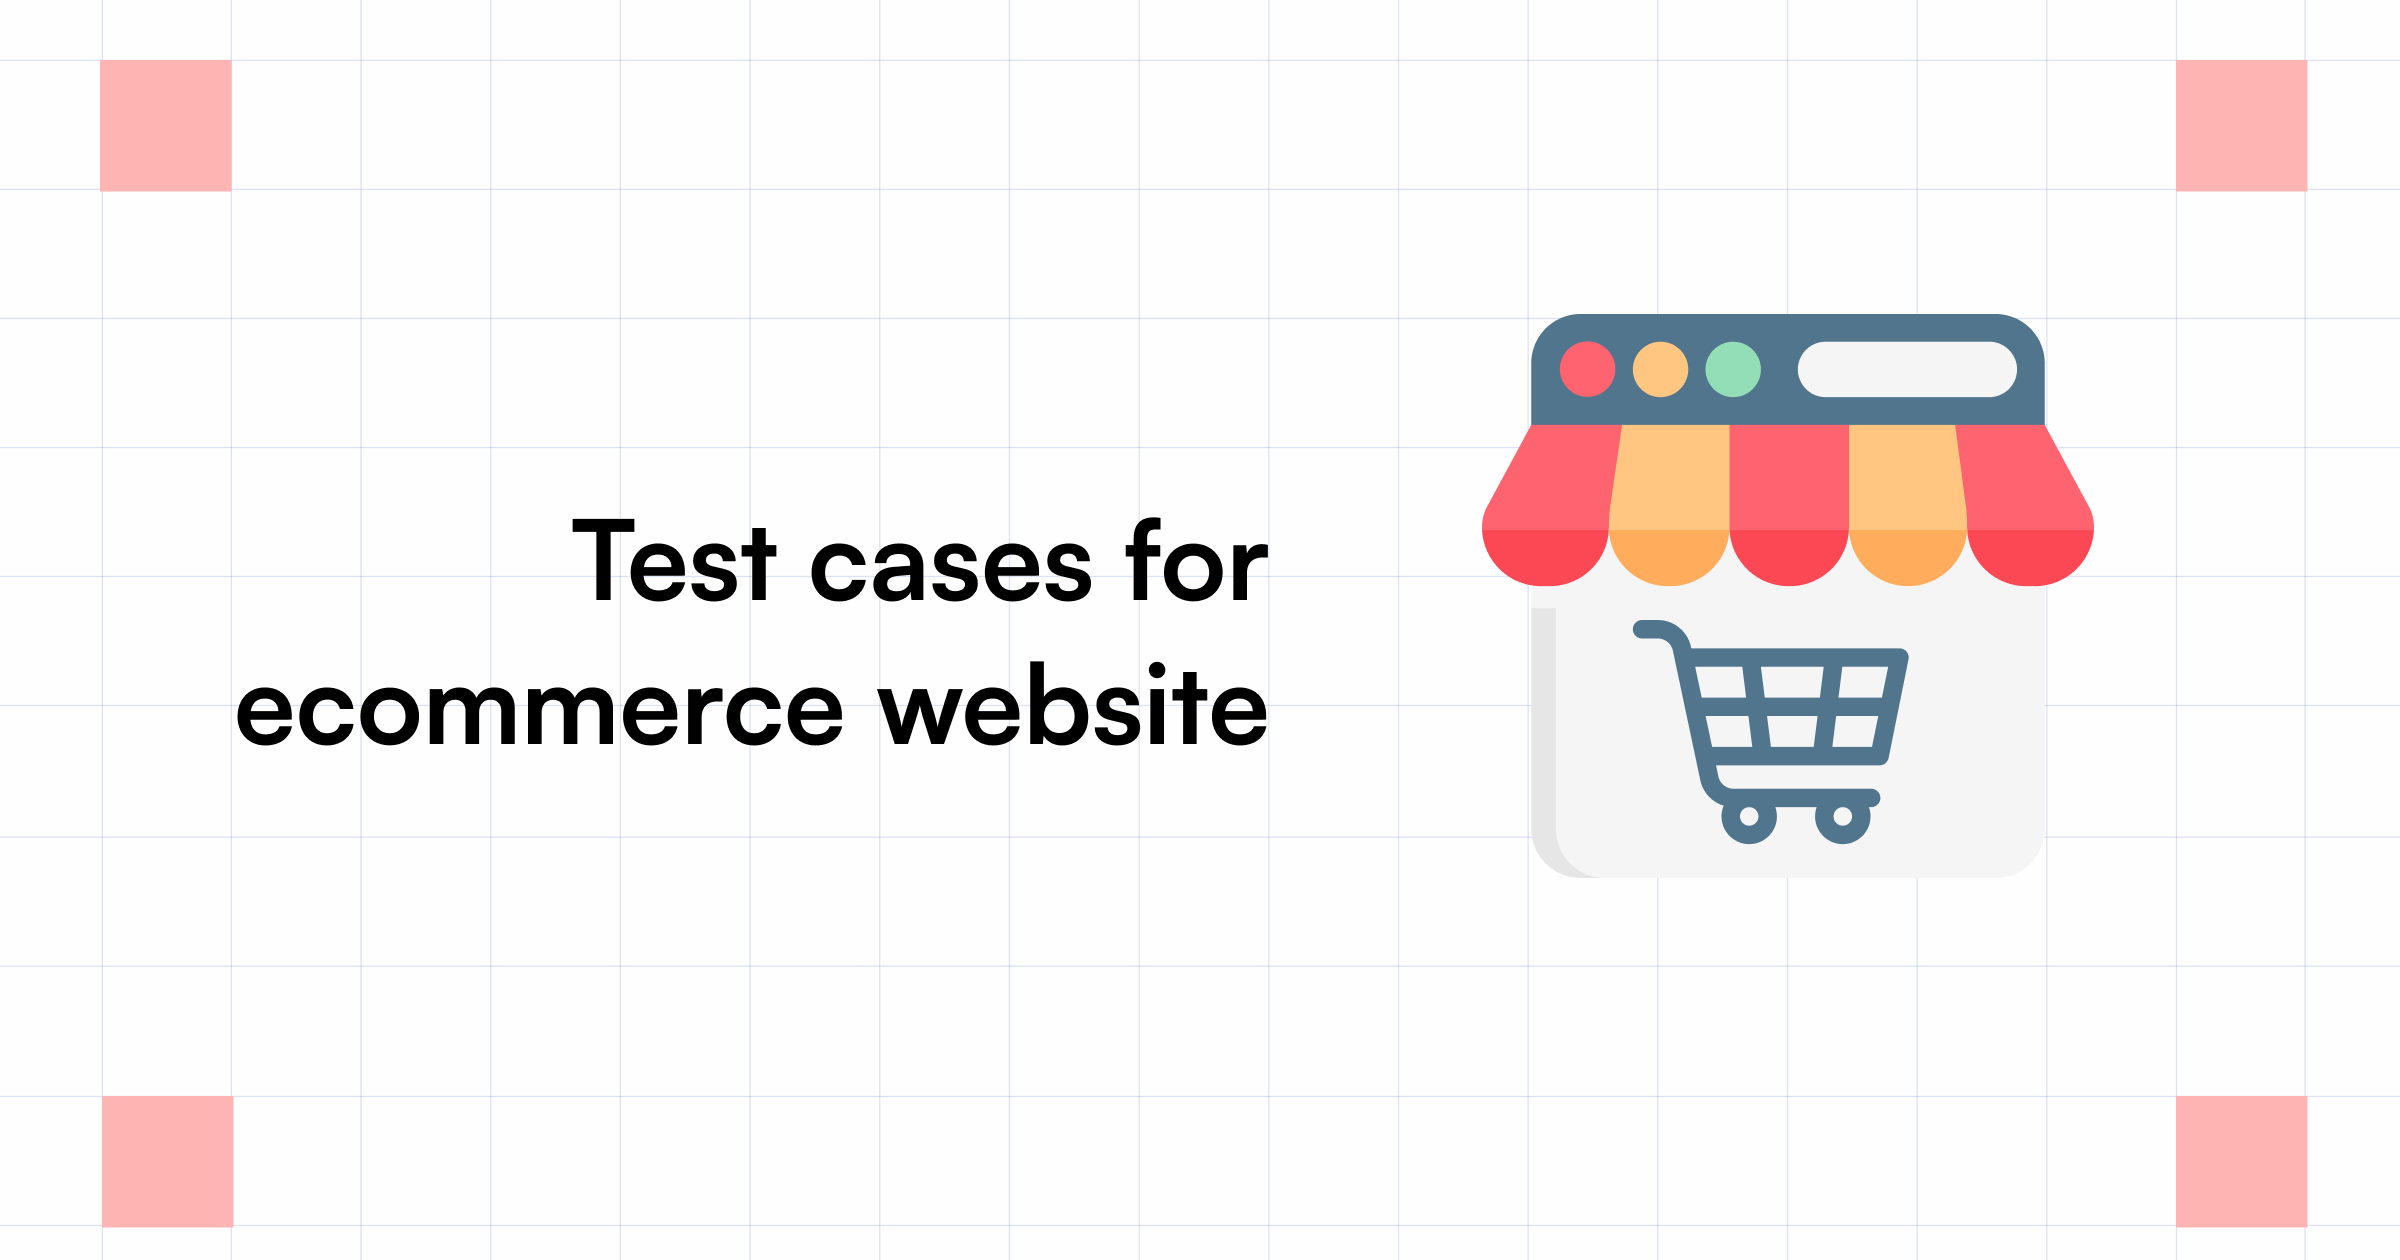 How to Write Test Cases for Ecommerce Website